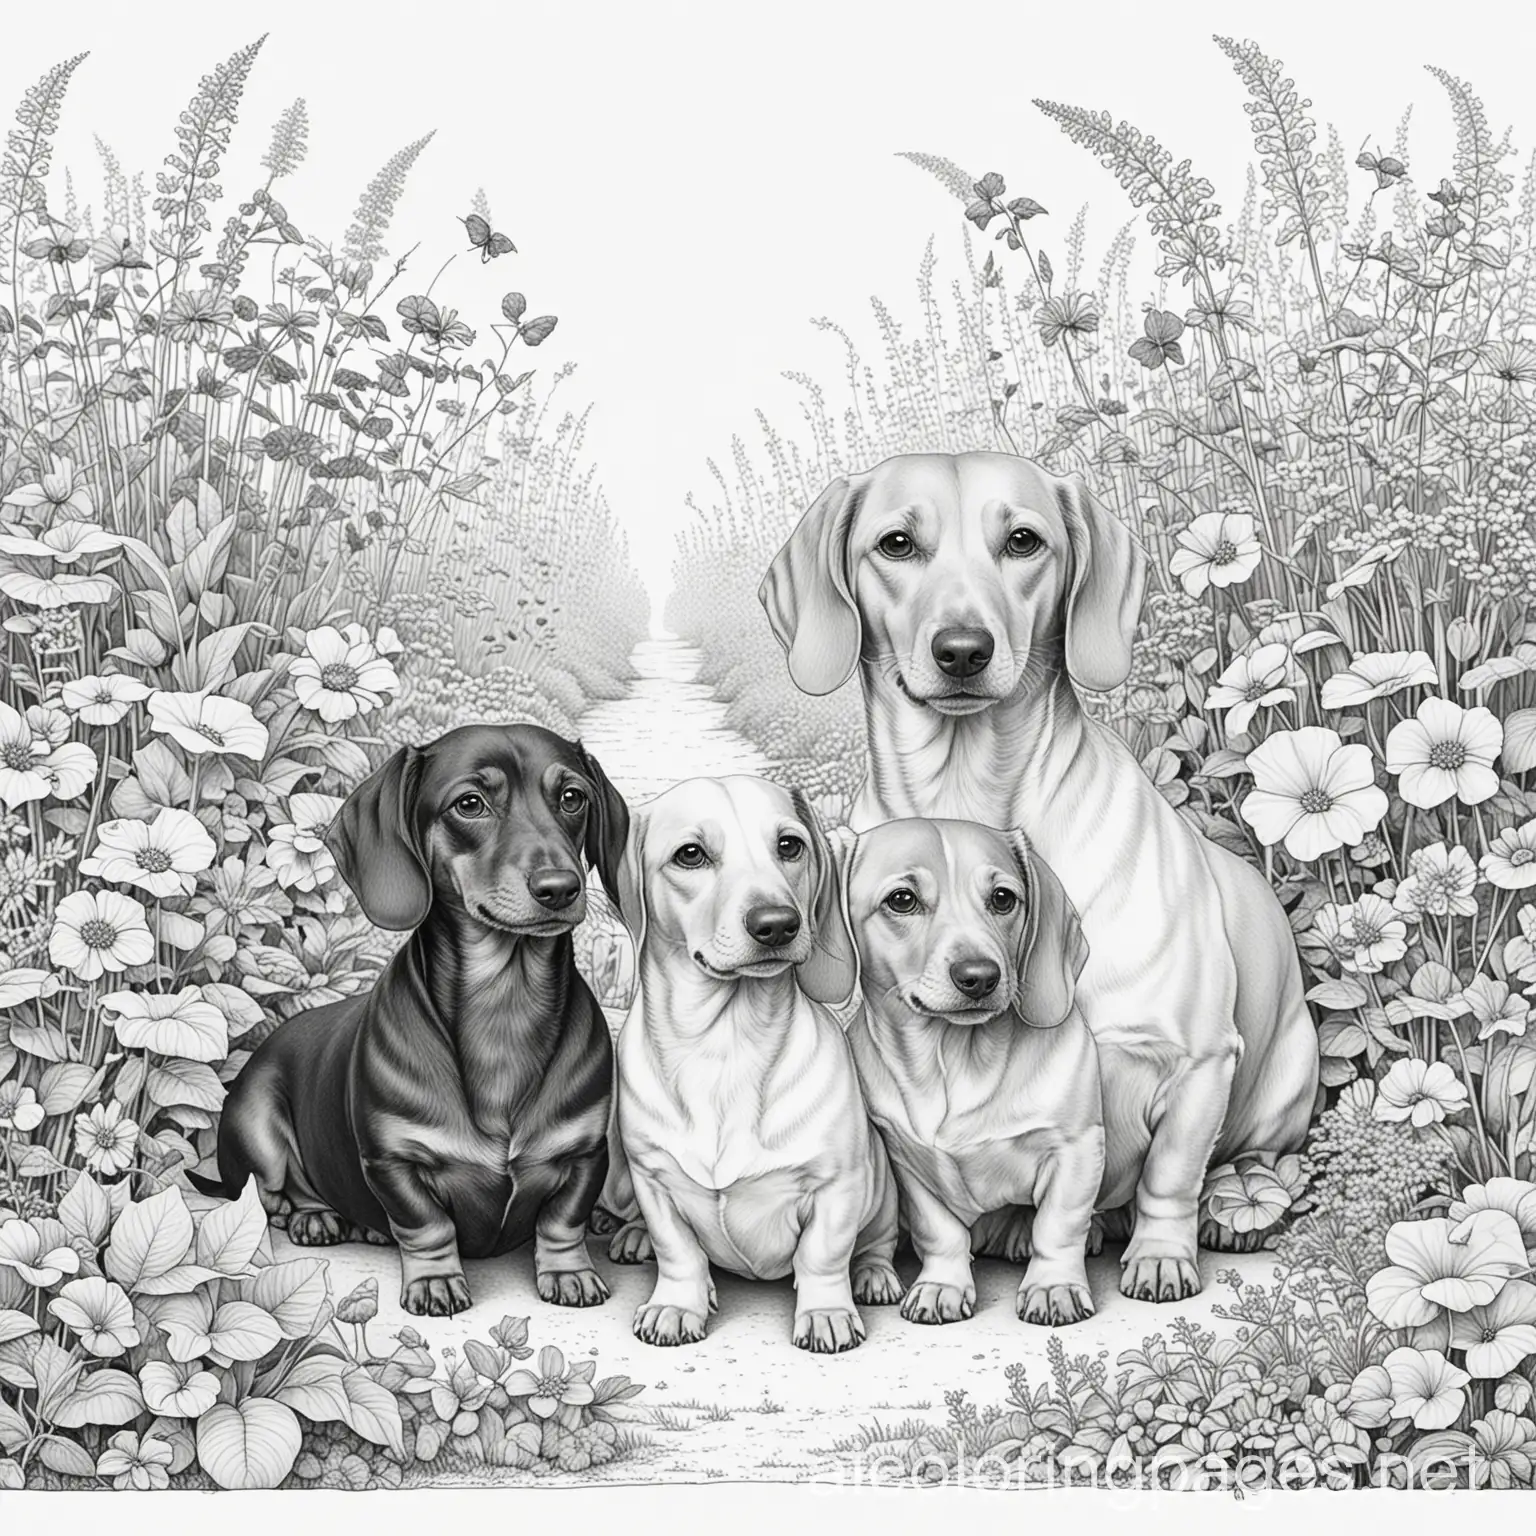 Garden of dachshunds, Coloring Page, black and white, line art, white background, Simplicity, Ample White Space. The background of the coloring page is plain white to make it easy for young children to color within the lines. The outlines of all the subjects are easy to distinguish, making it simple for kids to color without too much difficulty